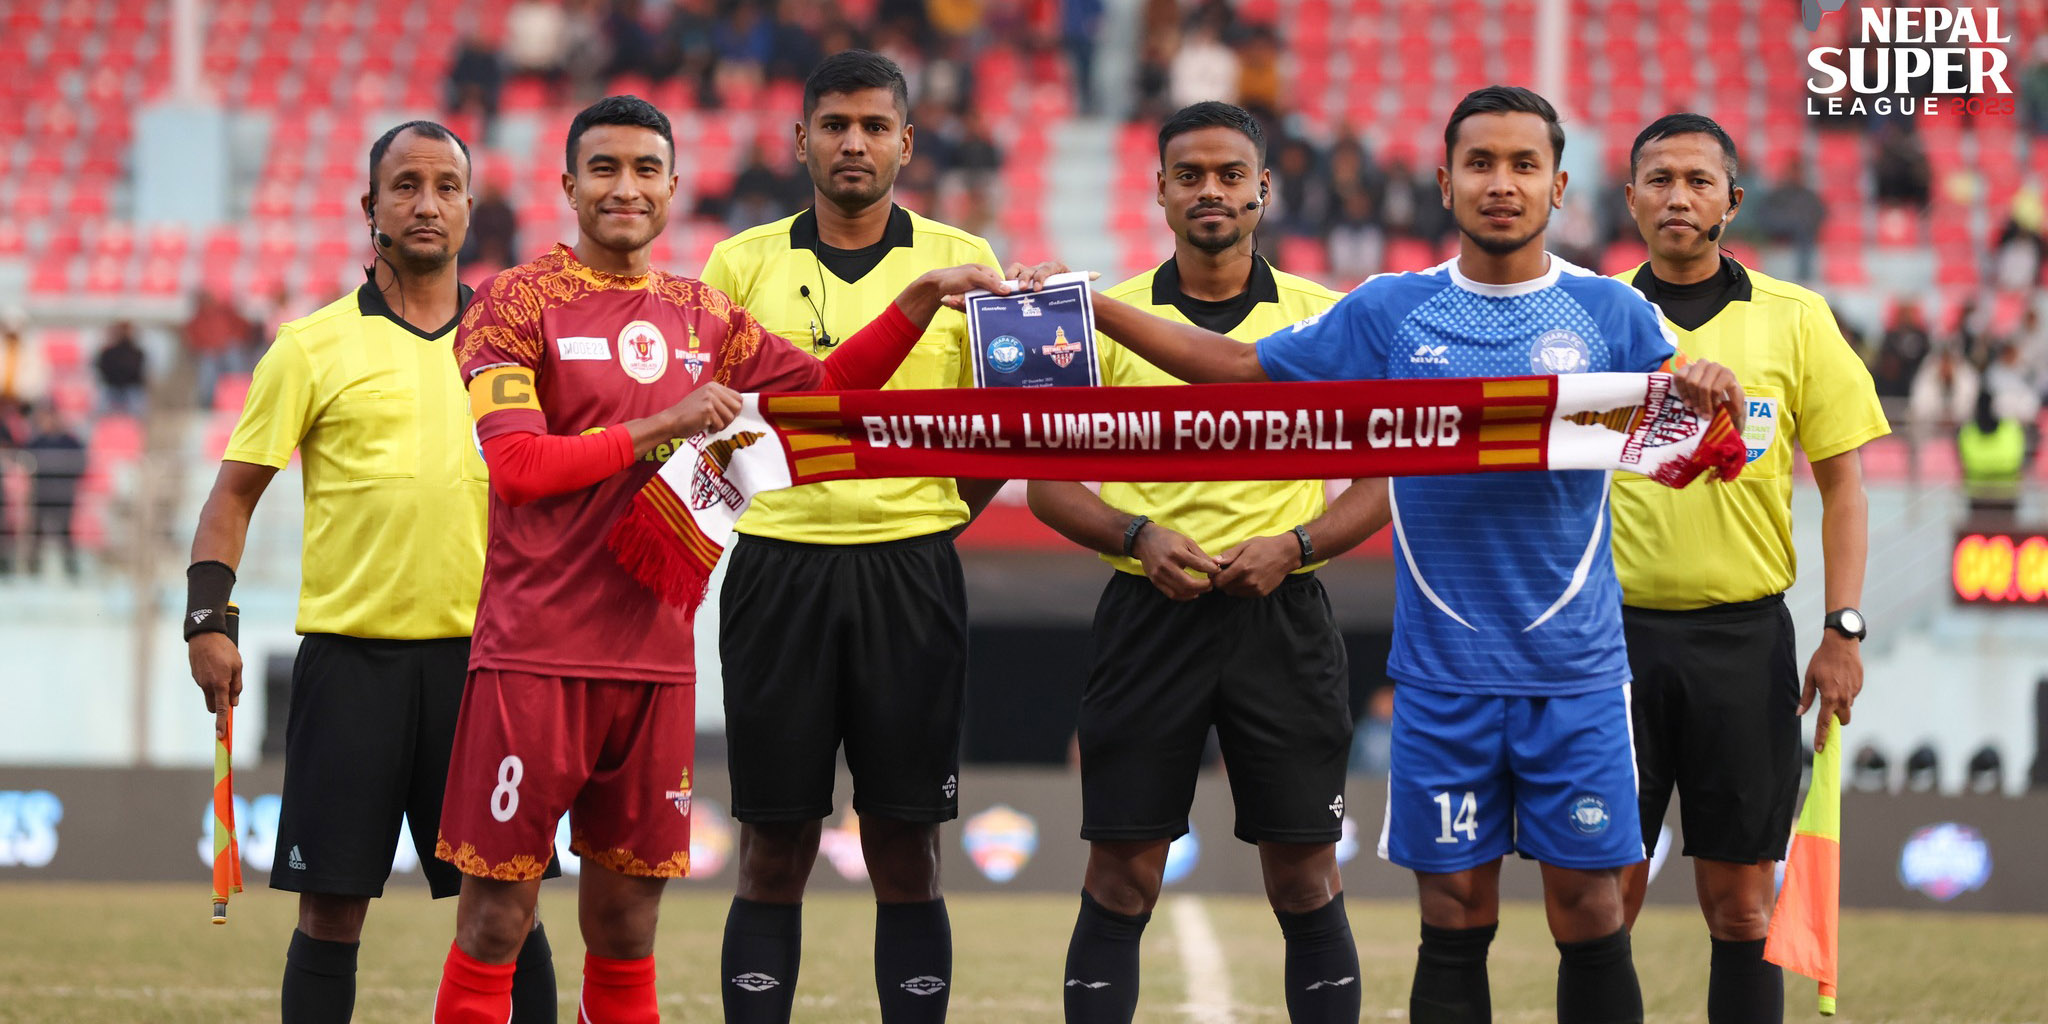 Jhapa defeats Butwal Lumbini 1-0 to get its first win in NSL